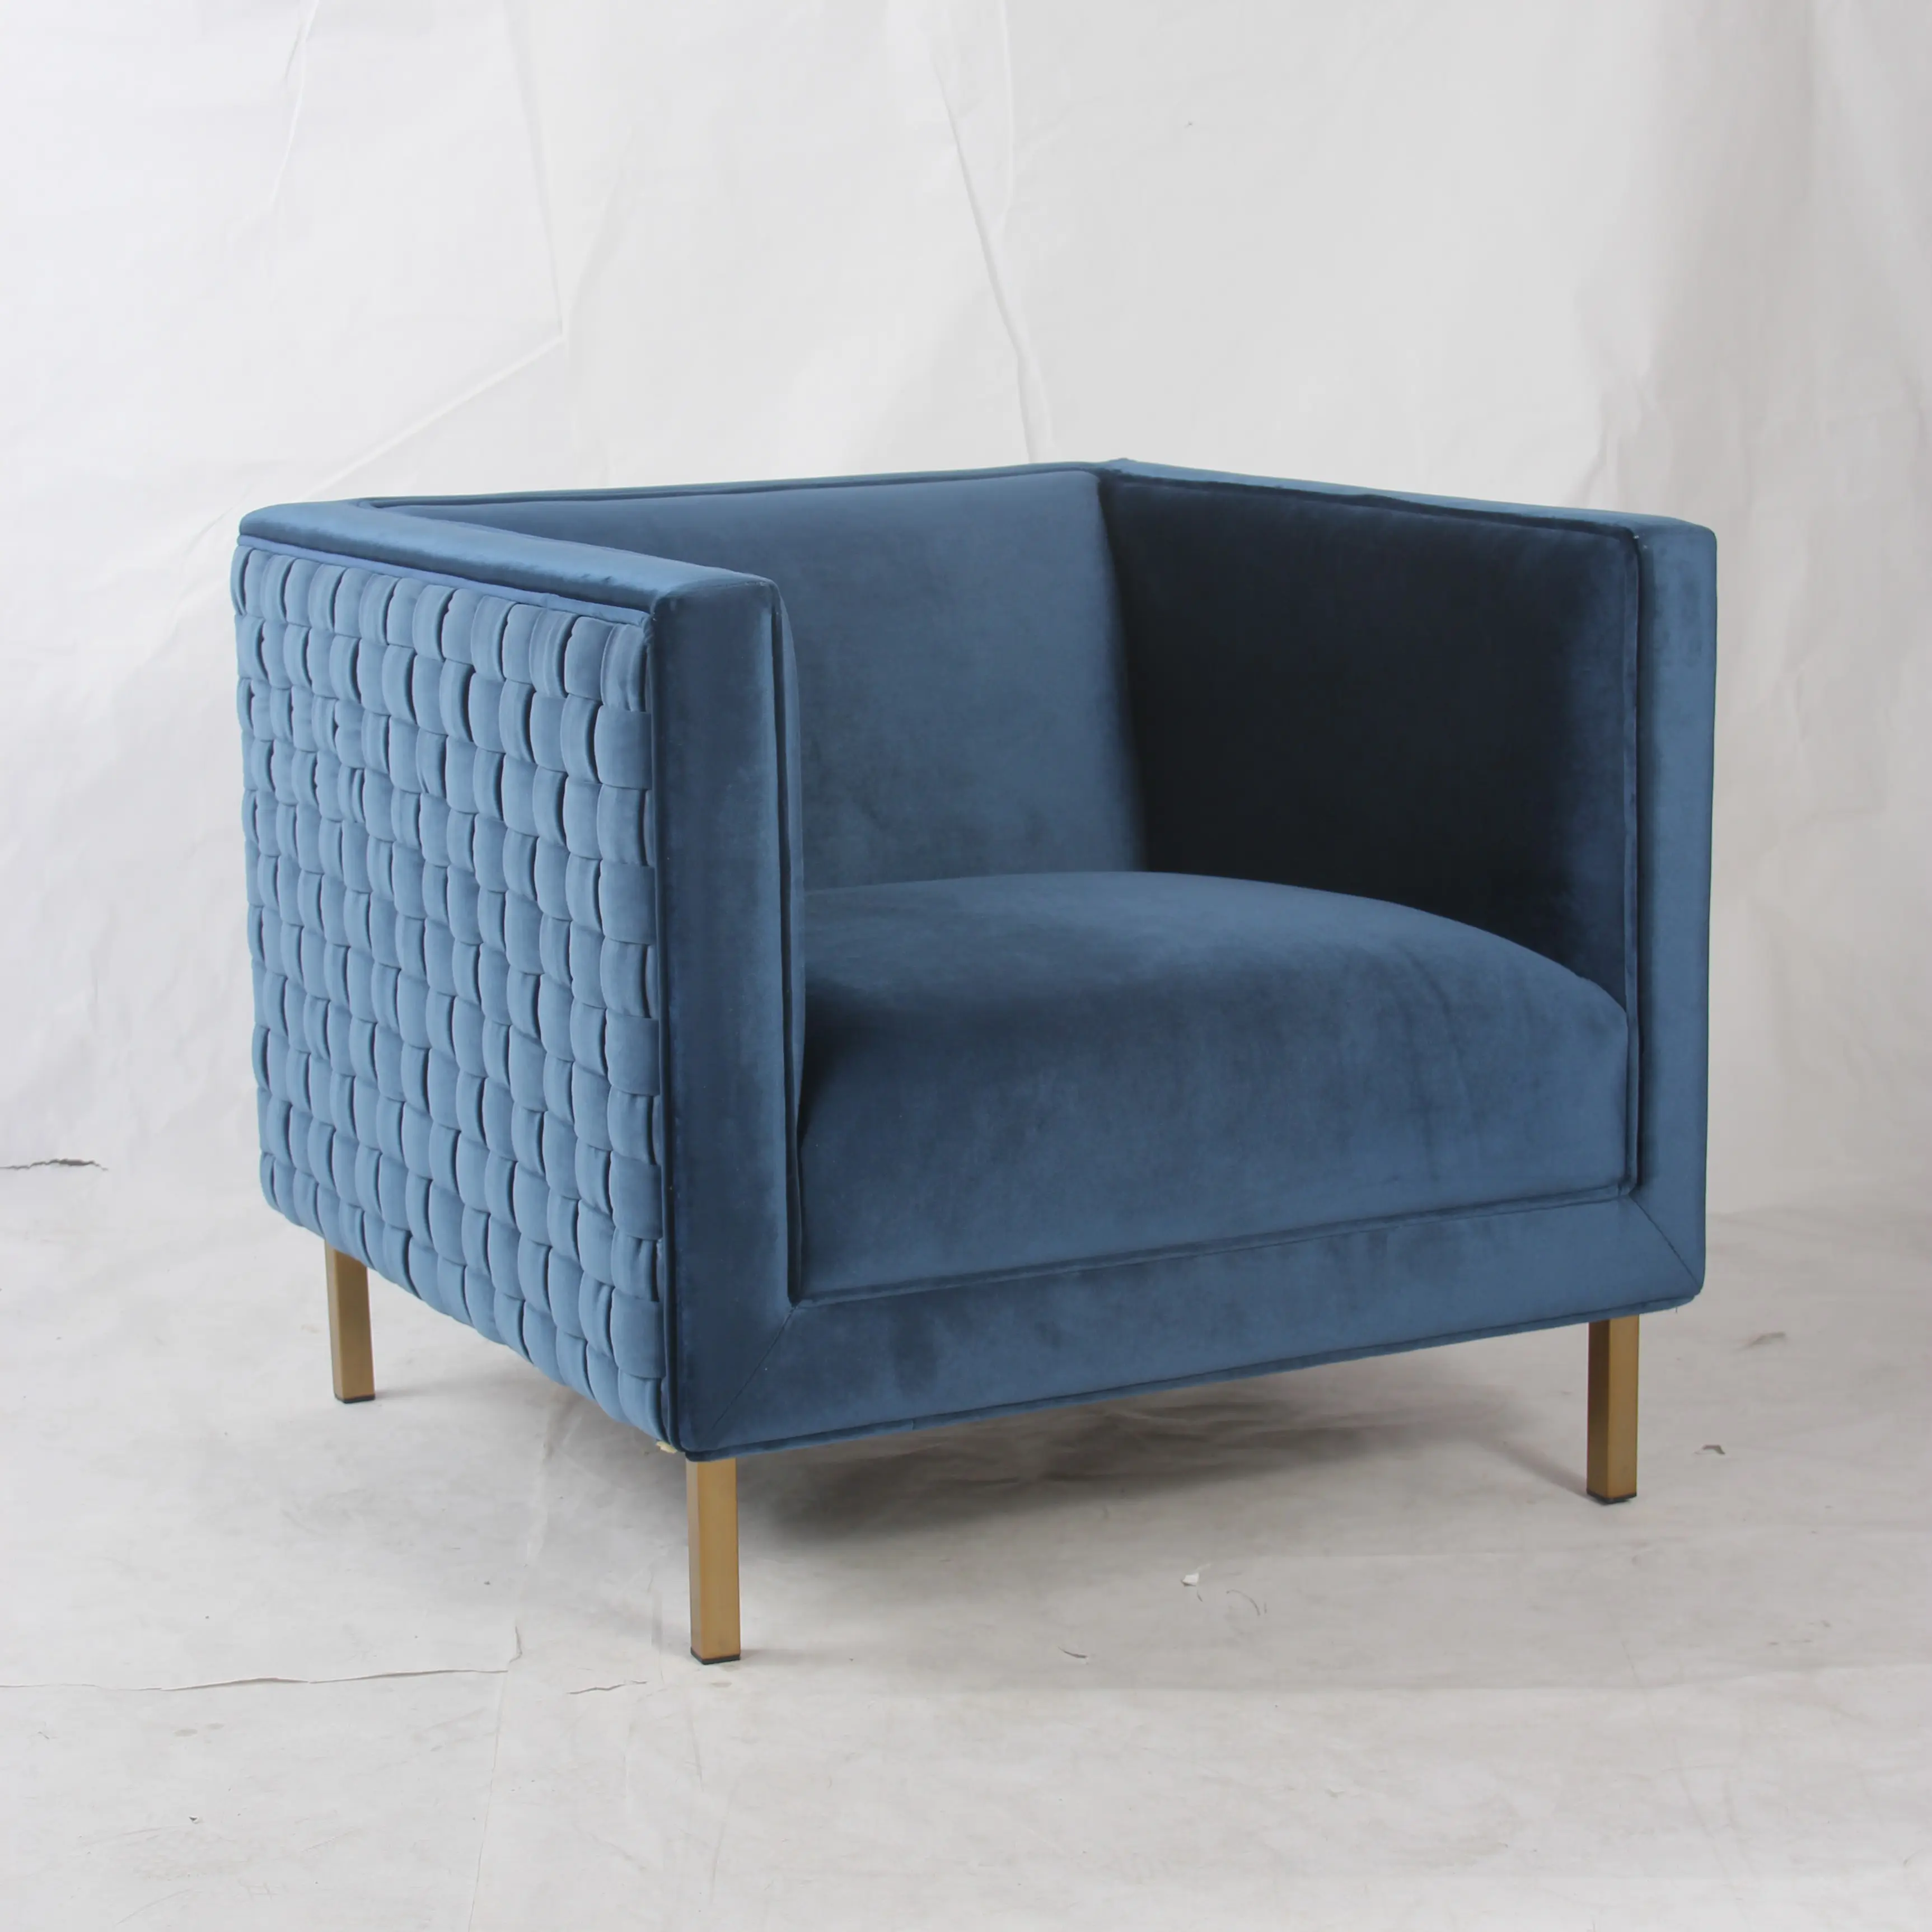 Blue Velvet Club Sofa Chair,Single Leisure Chair,Hotel Guest Accent Chair for Living Room,Restaurant,Cafe